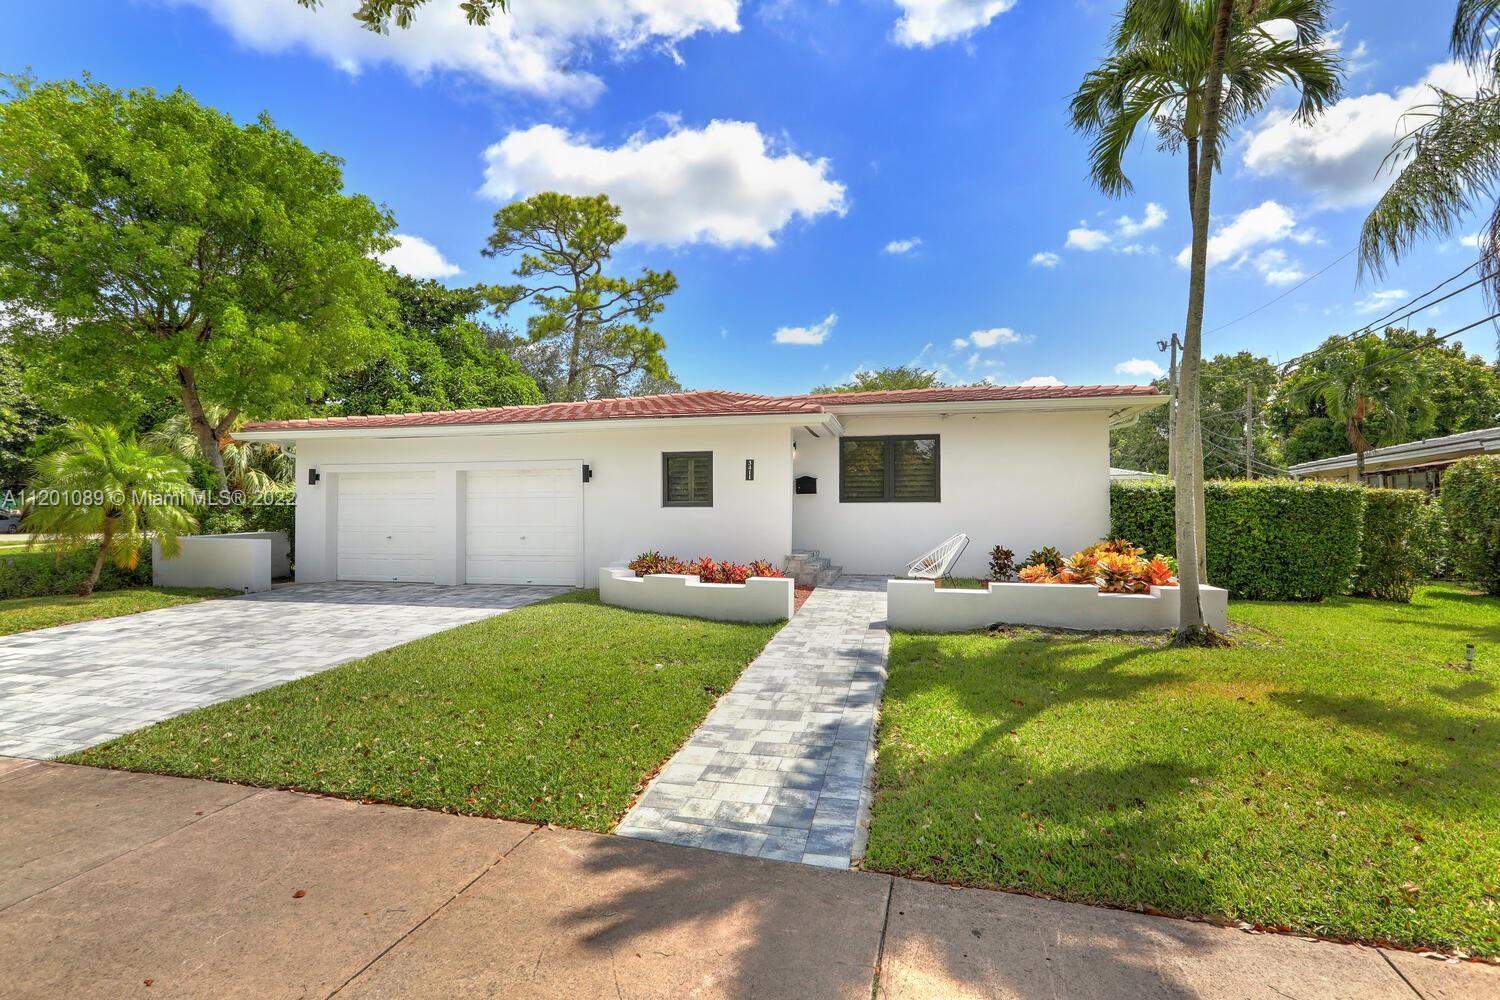 Photo of 3411 Riviera Dr in Coral Gables, FL